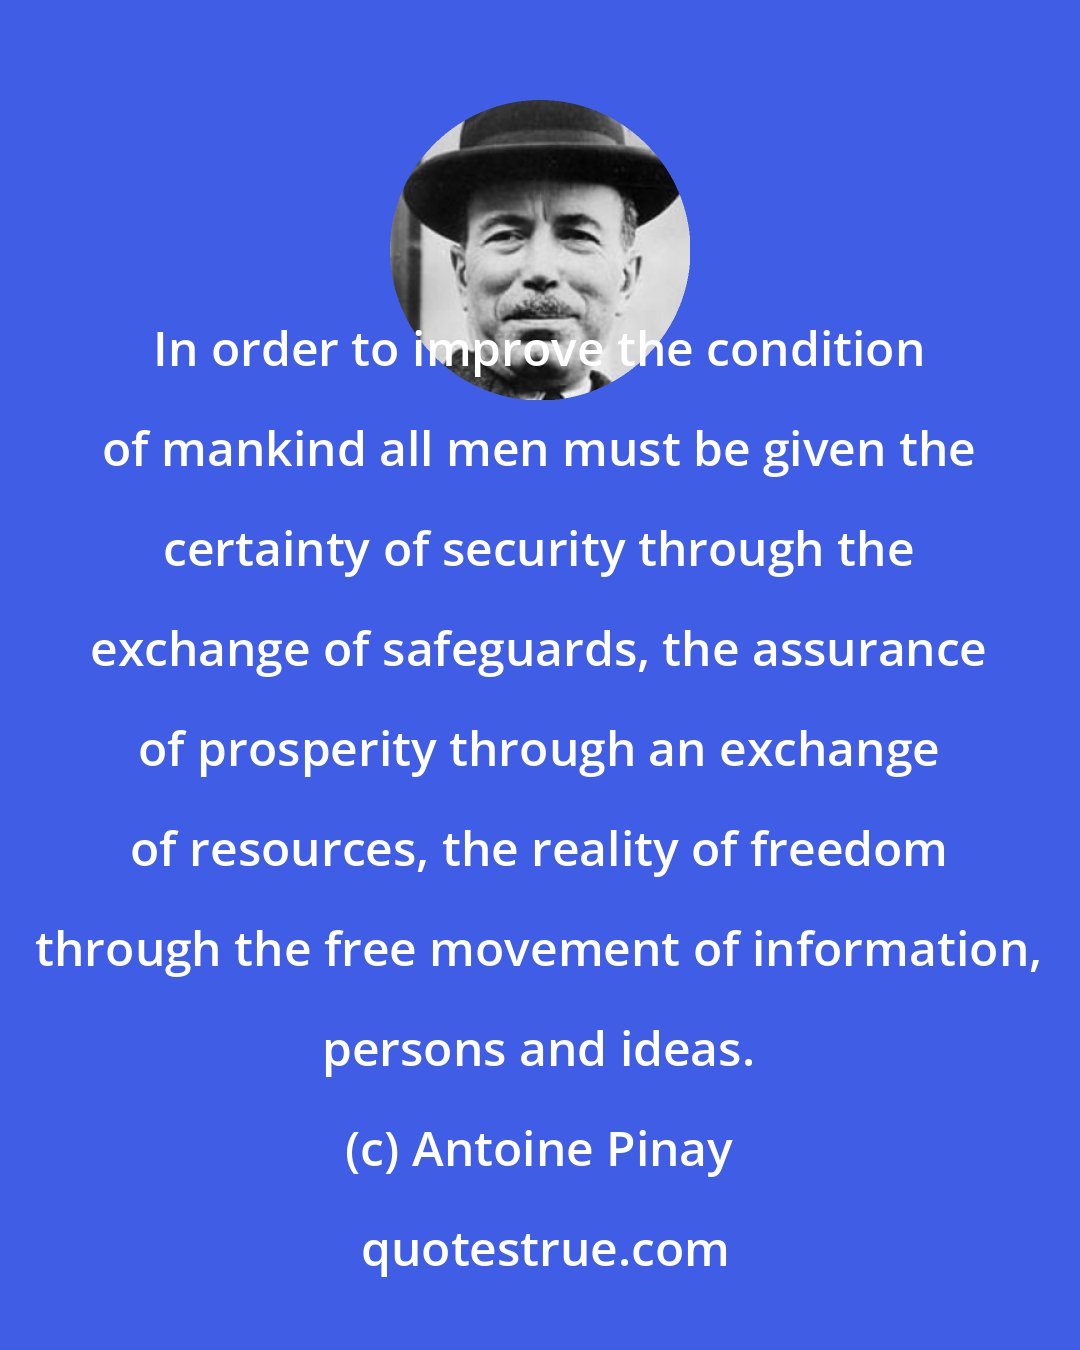 Antoine Pinay: In order to improve the condition of mankind all men must be given the certainty of security through the exchange of safeguards, the assurance of prosperity through an exchange of resources, the reality of freedom through the free movement of information, persons and ideas.